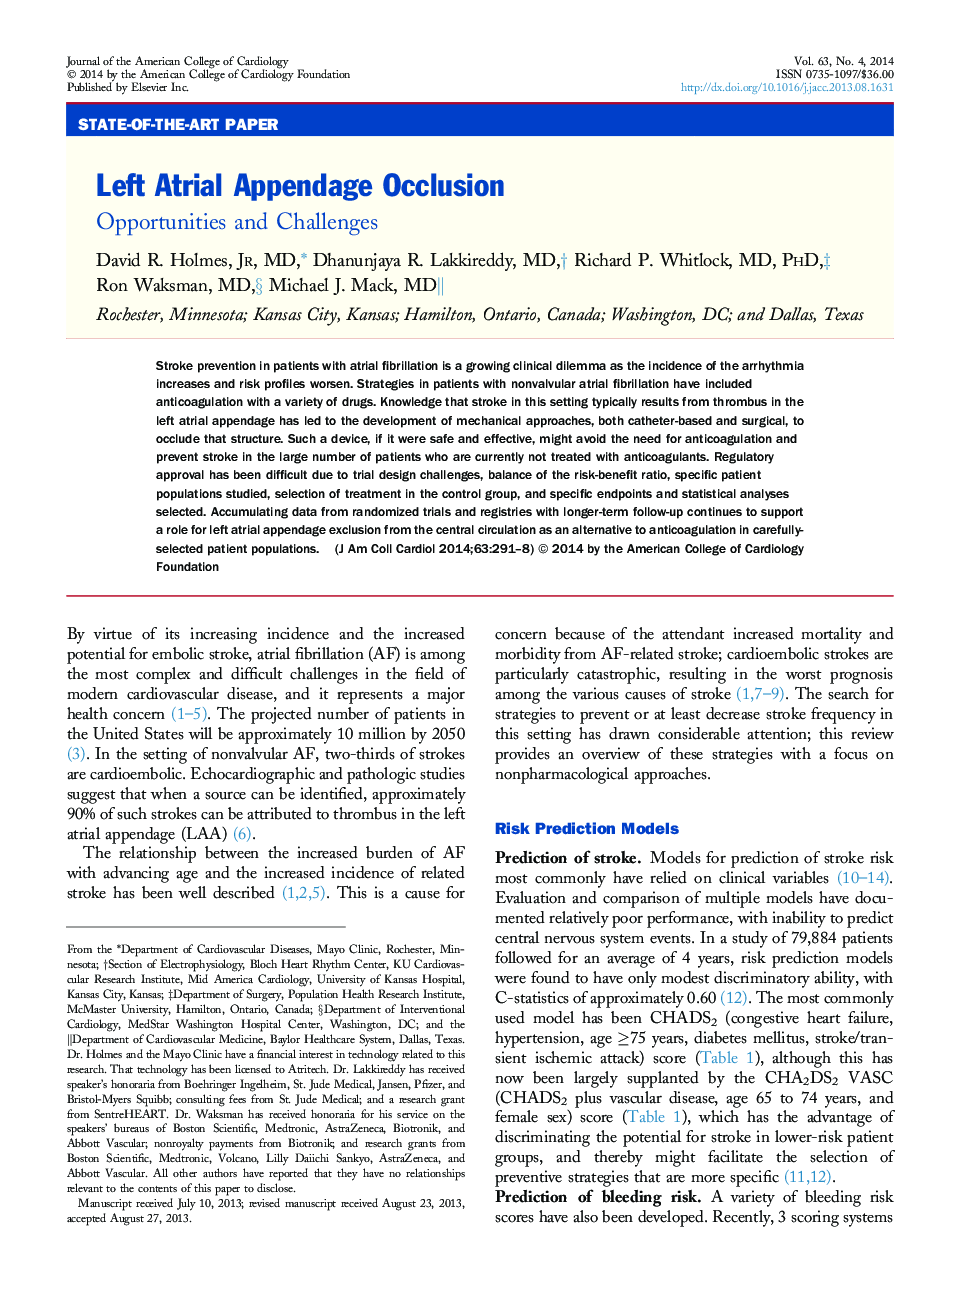 Left Atrial Appendage Occlusion : Opportunities and Challenges